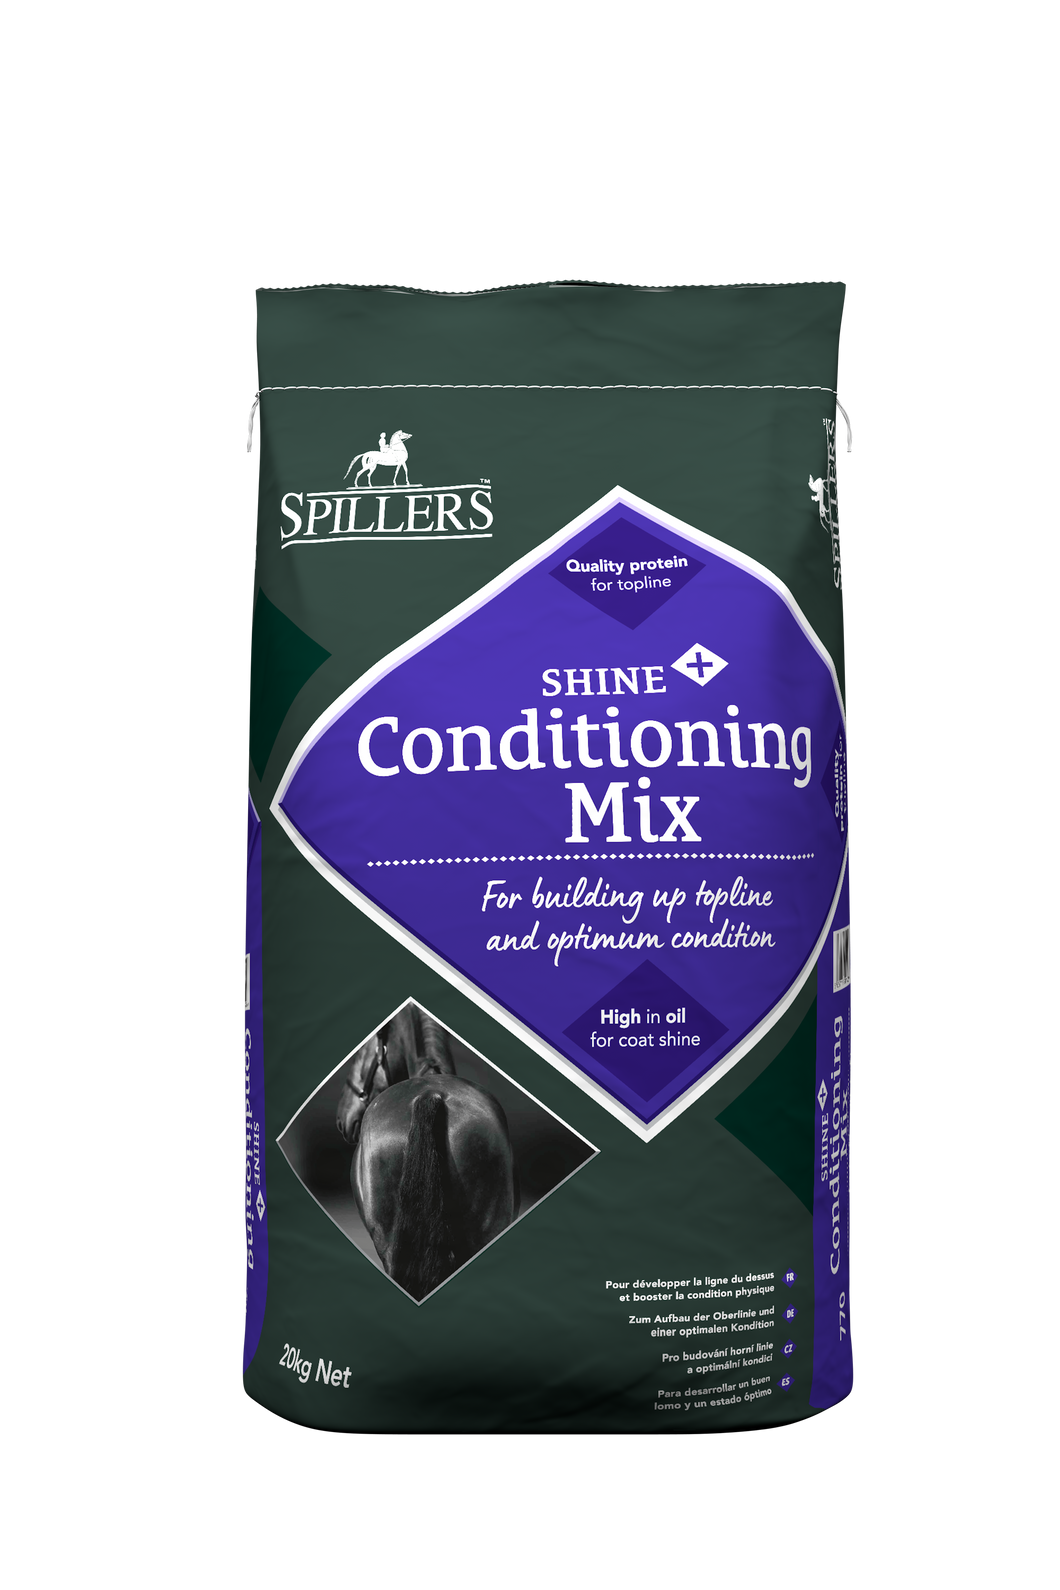 Spillers Shine + Conditioning Mix 20kg